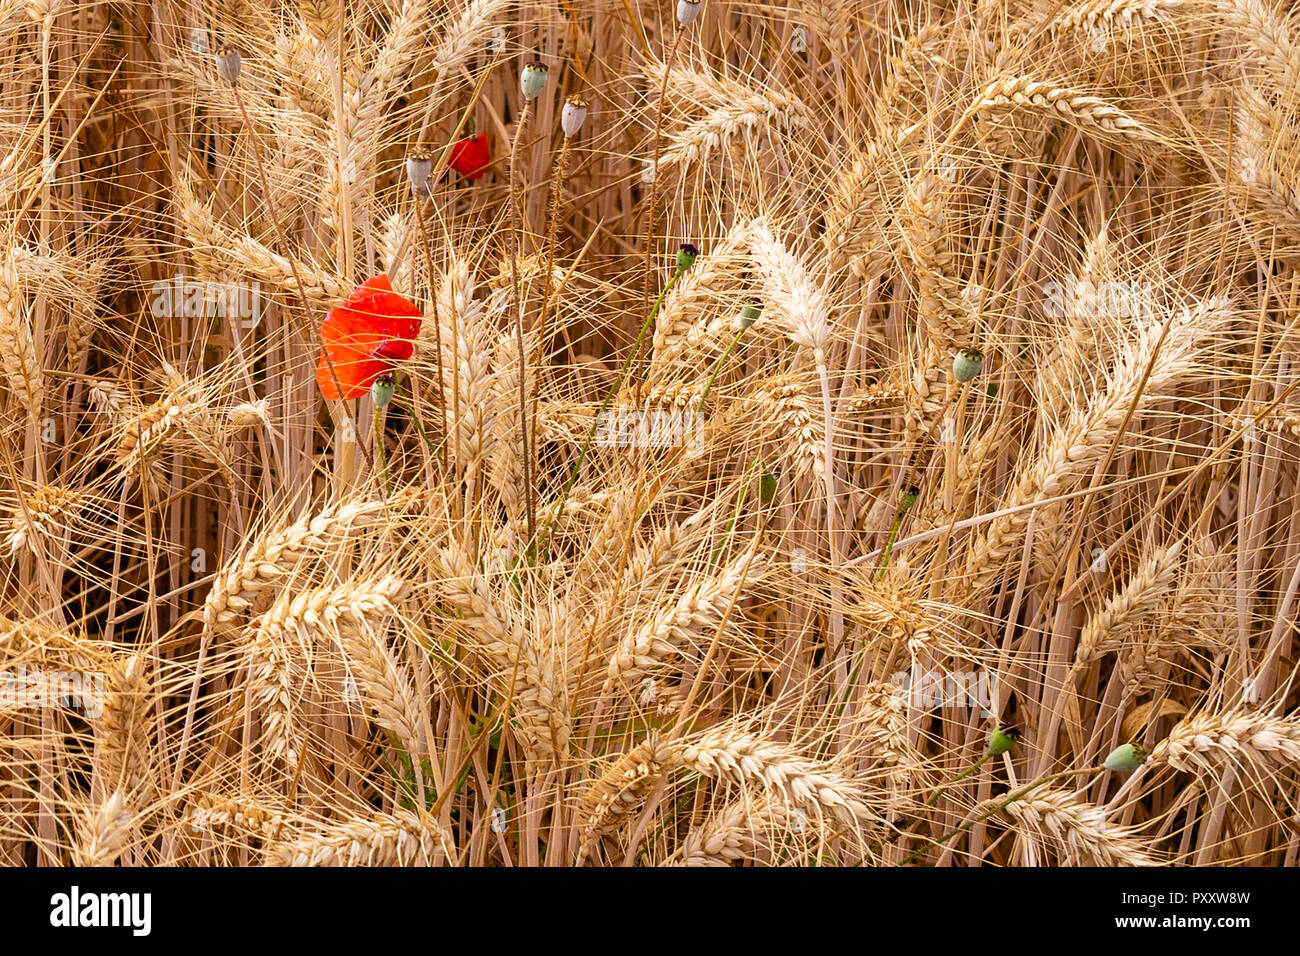 Poppies in a field of barley, Stamford, Lincolnshire, UK Stock Photo